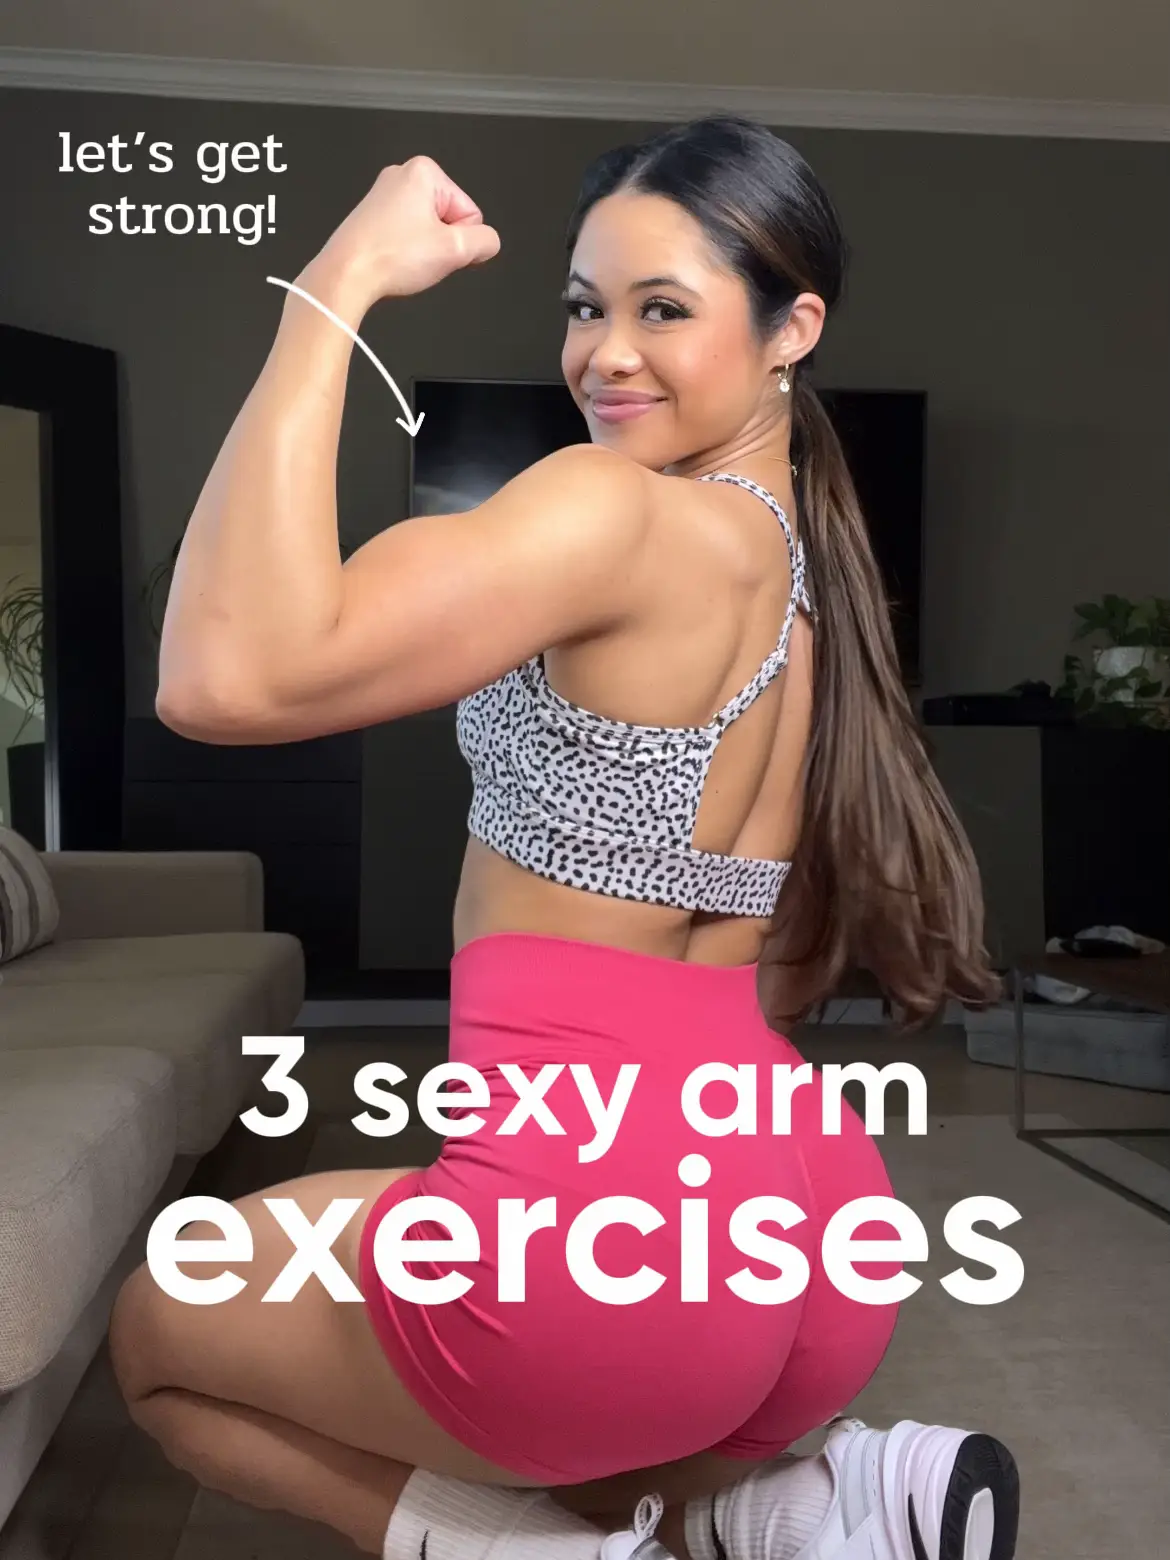 You want toned arms? Do this using the @ml.fitness App! #armfat